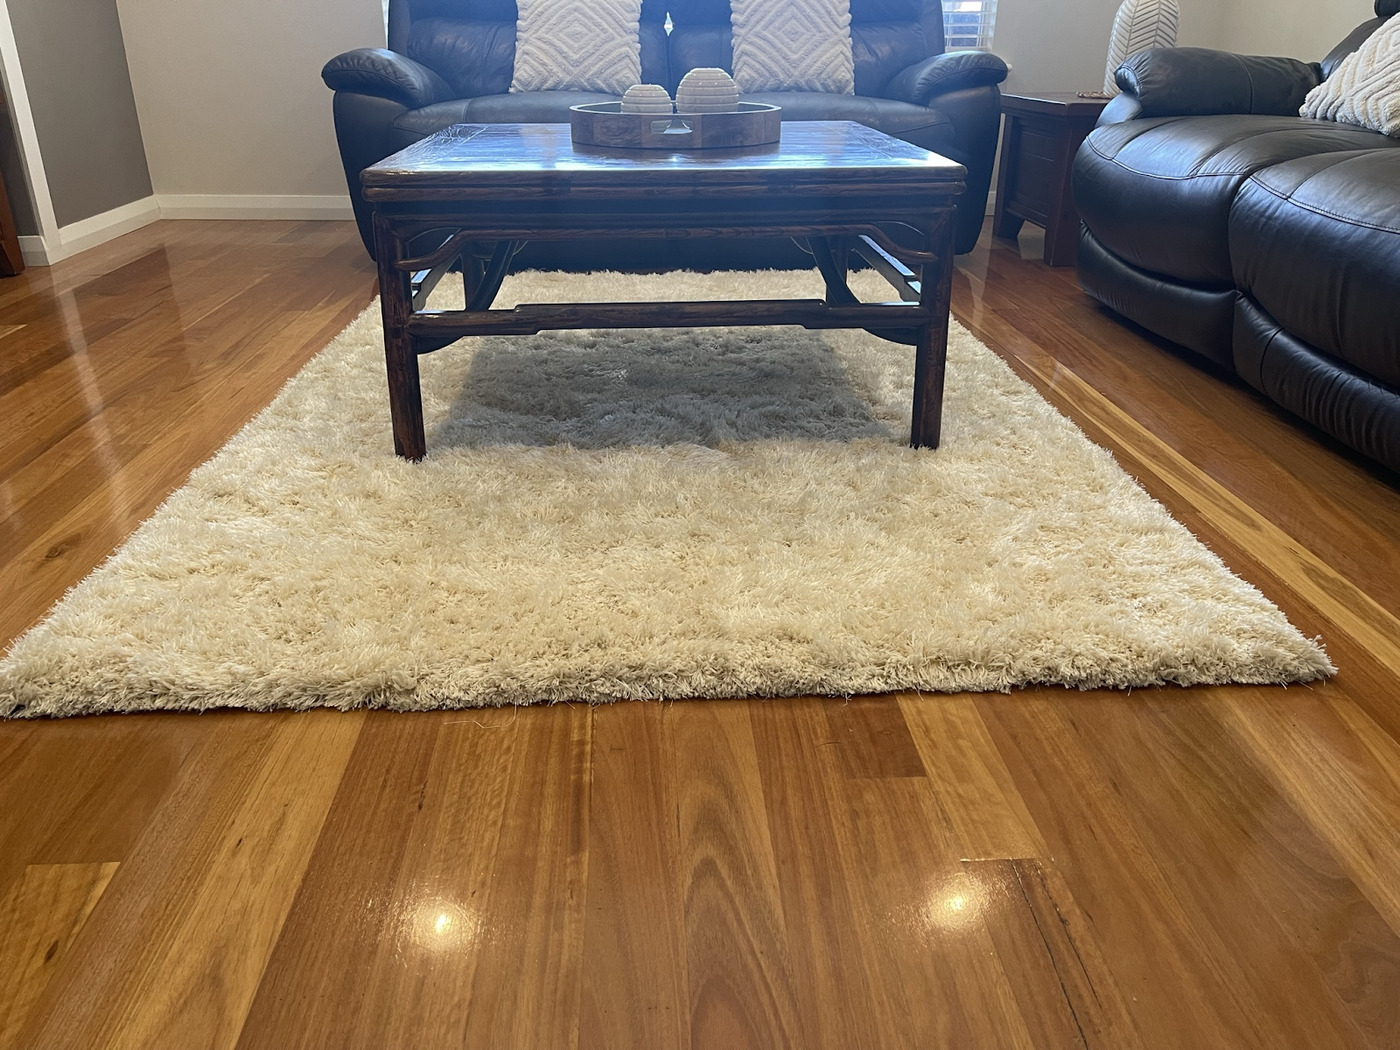 Crystal Carpet Cleaners Perth is a premier carpet cleaning company based in Piara Waters, Western Australia.